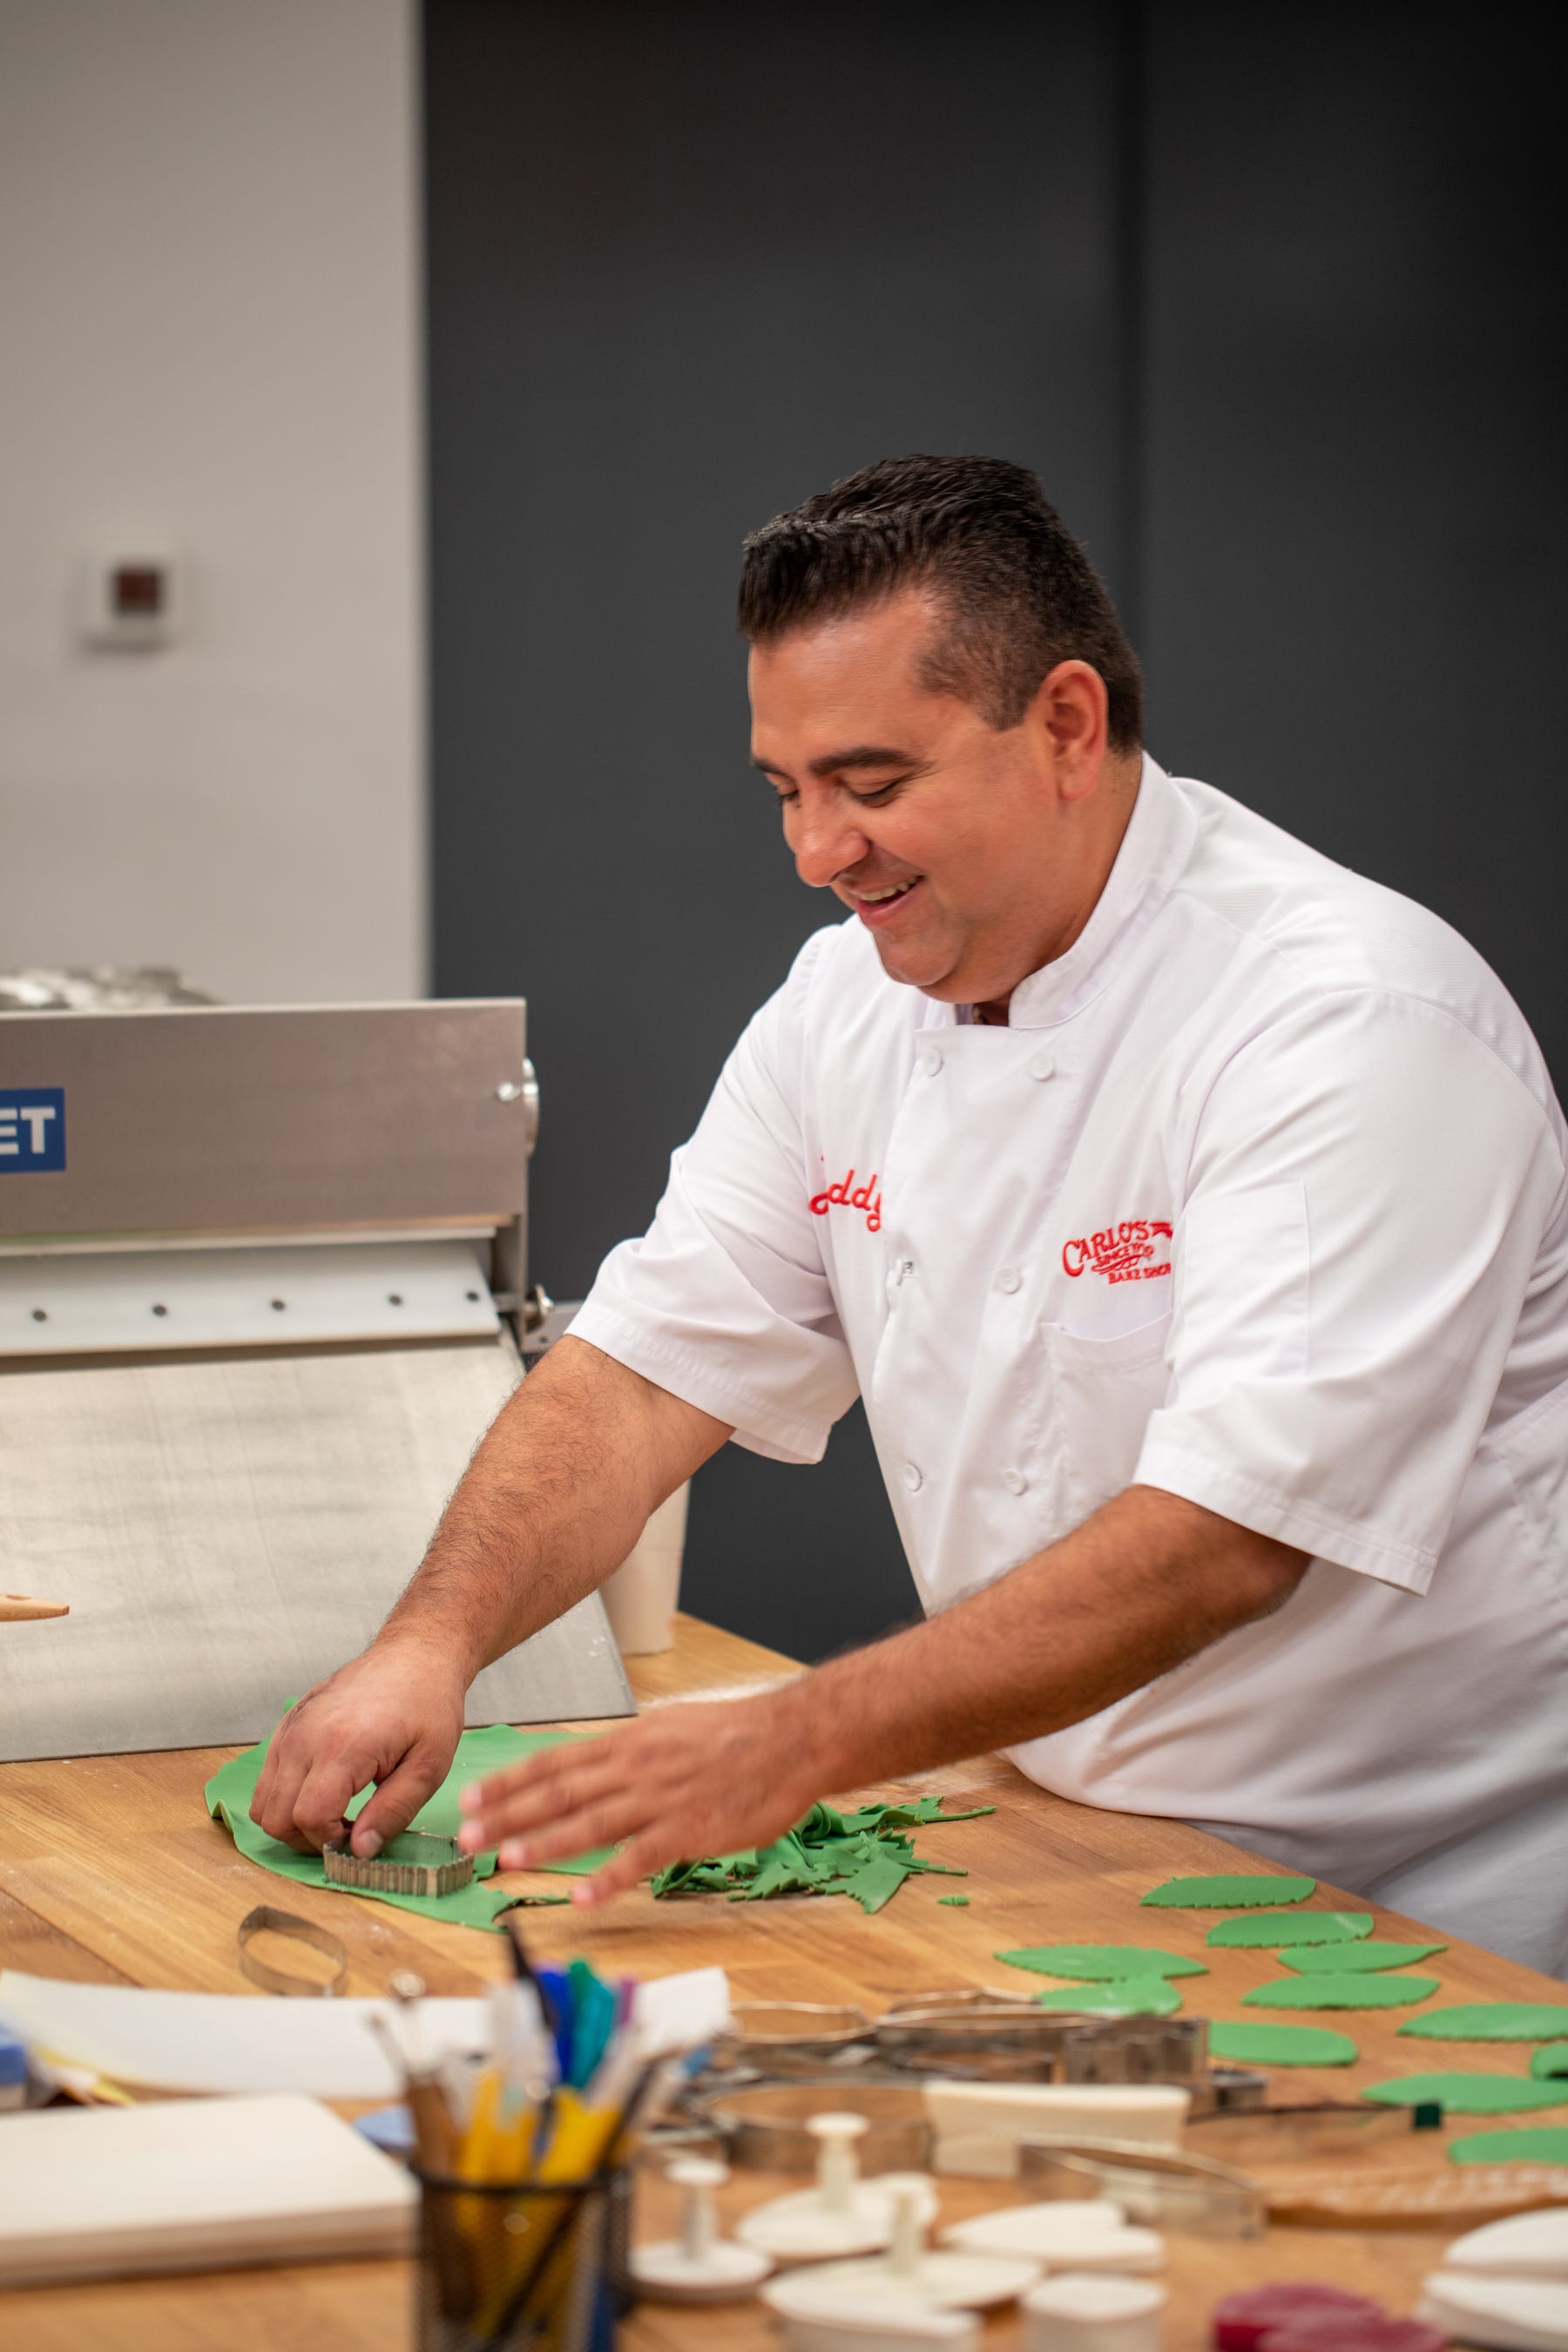 'Cake Boss' Buddy Valastro says hand is 95% healed 1 year after gruesome injury